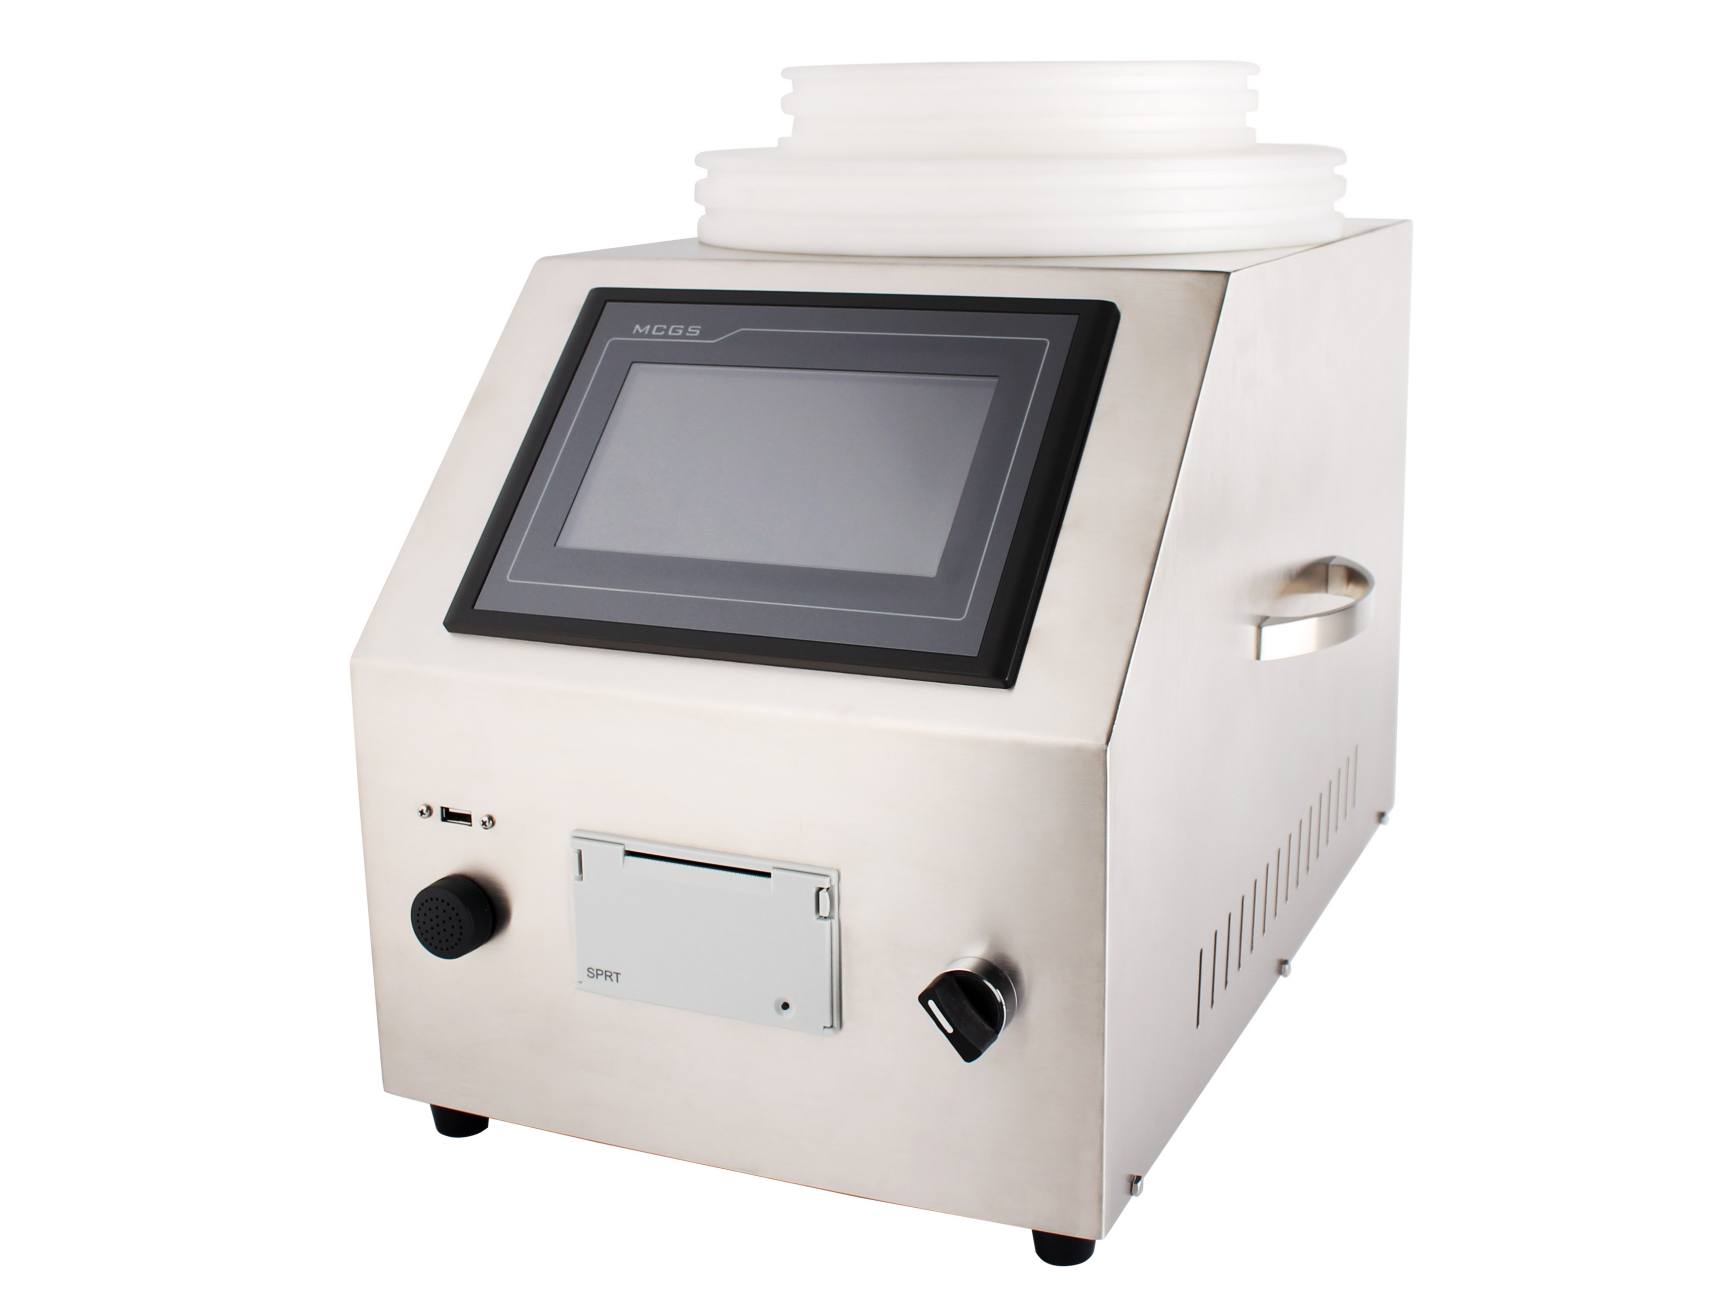 TW-GLD16 Glove Integrity Tester TOONE  Pharmaceutical Laboratory Glove Integrity Tester For Isolator Automatically